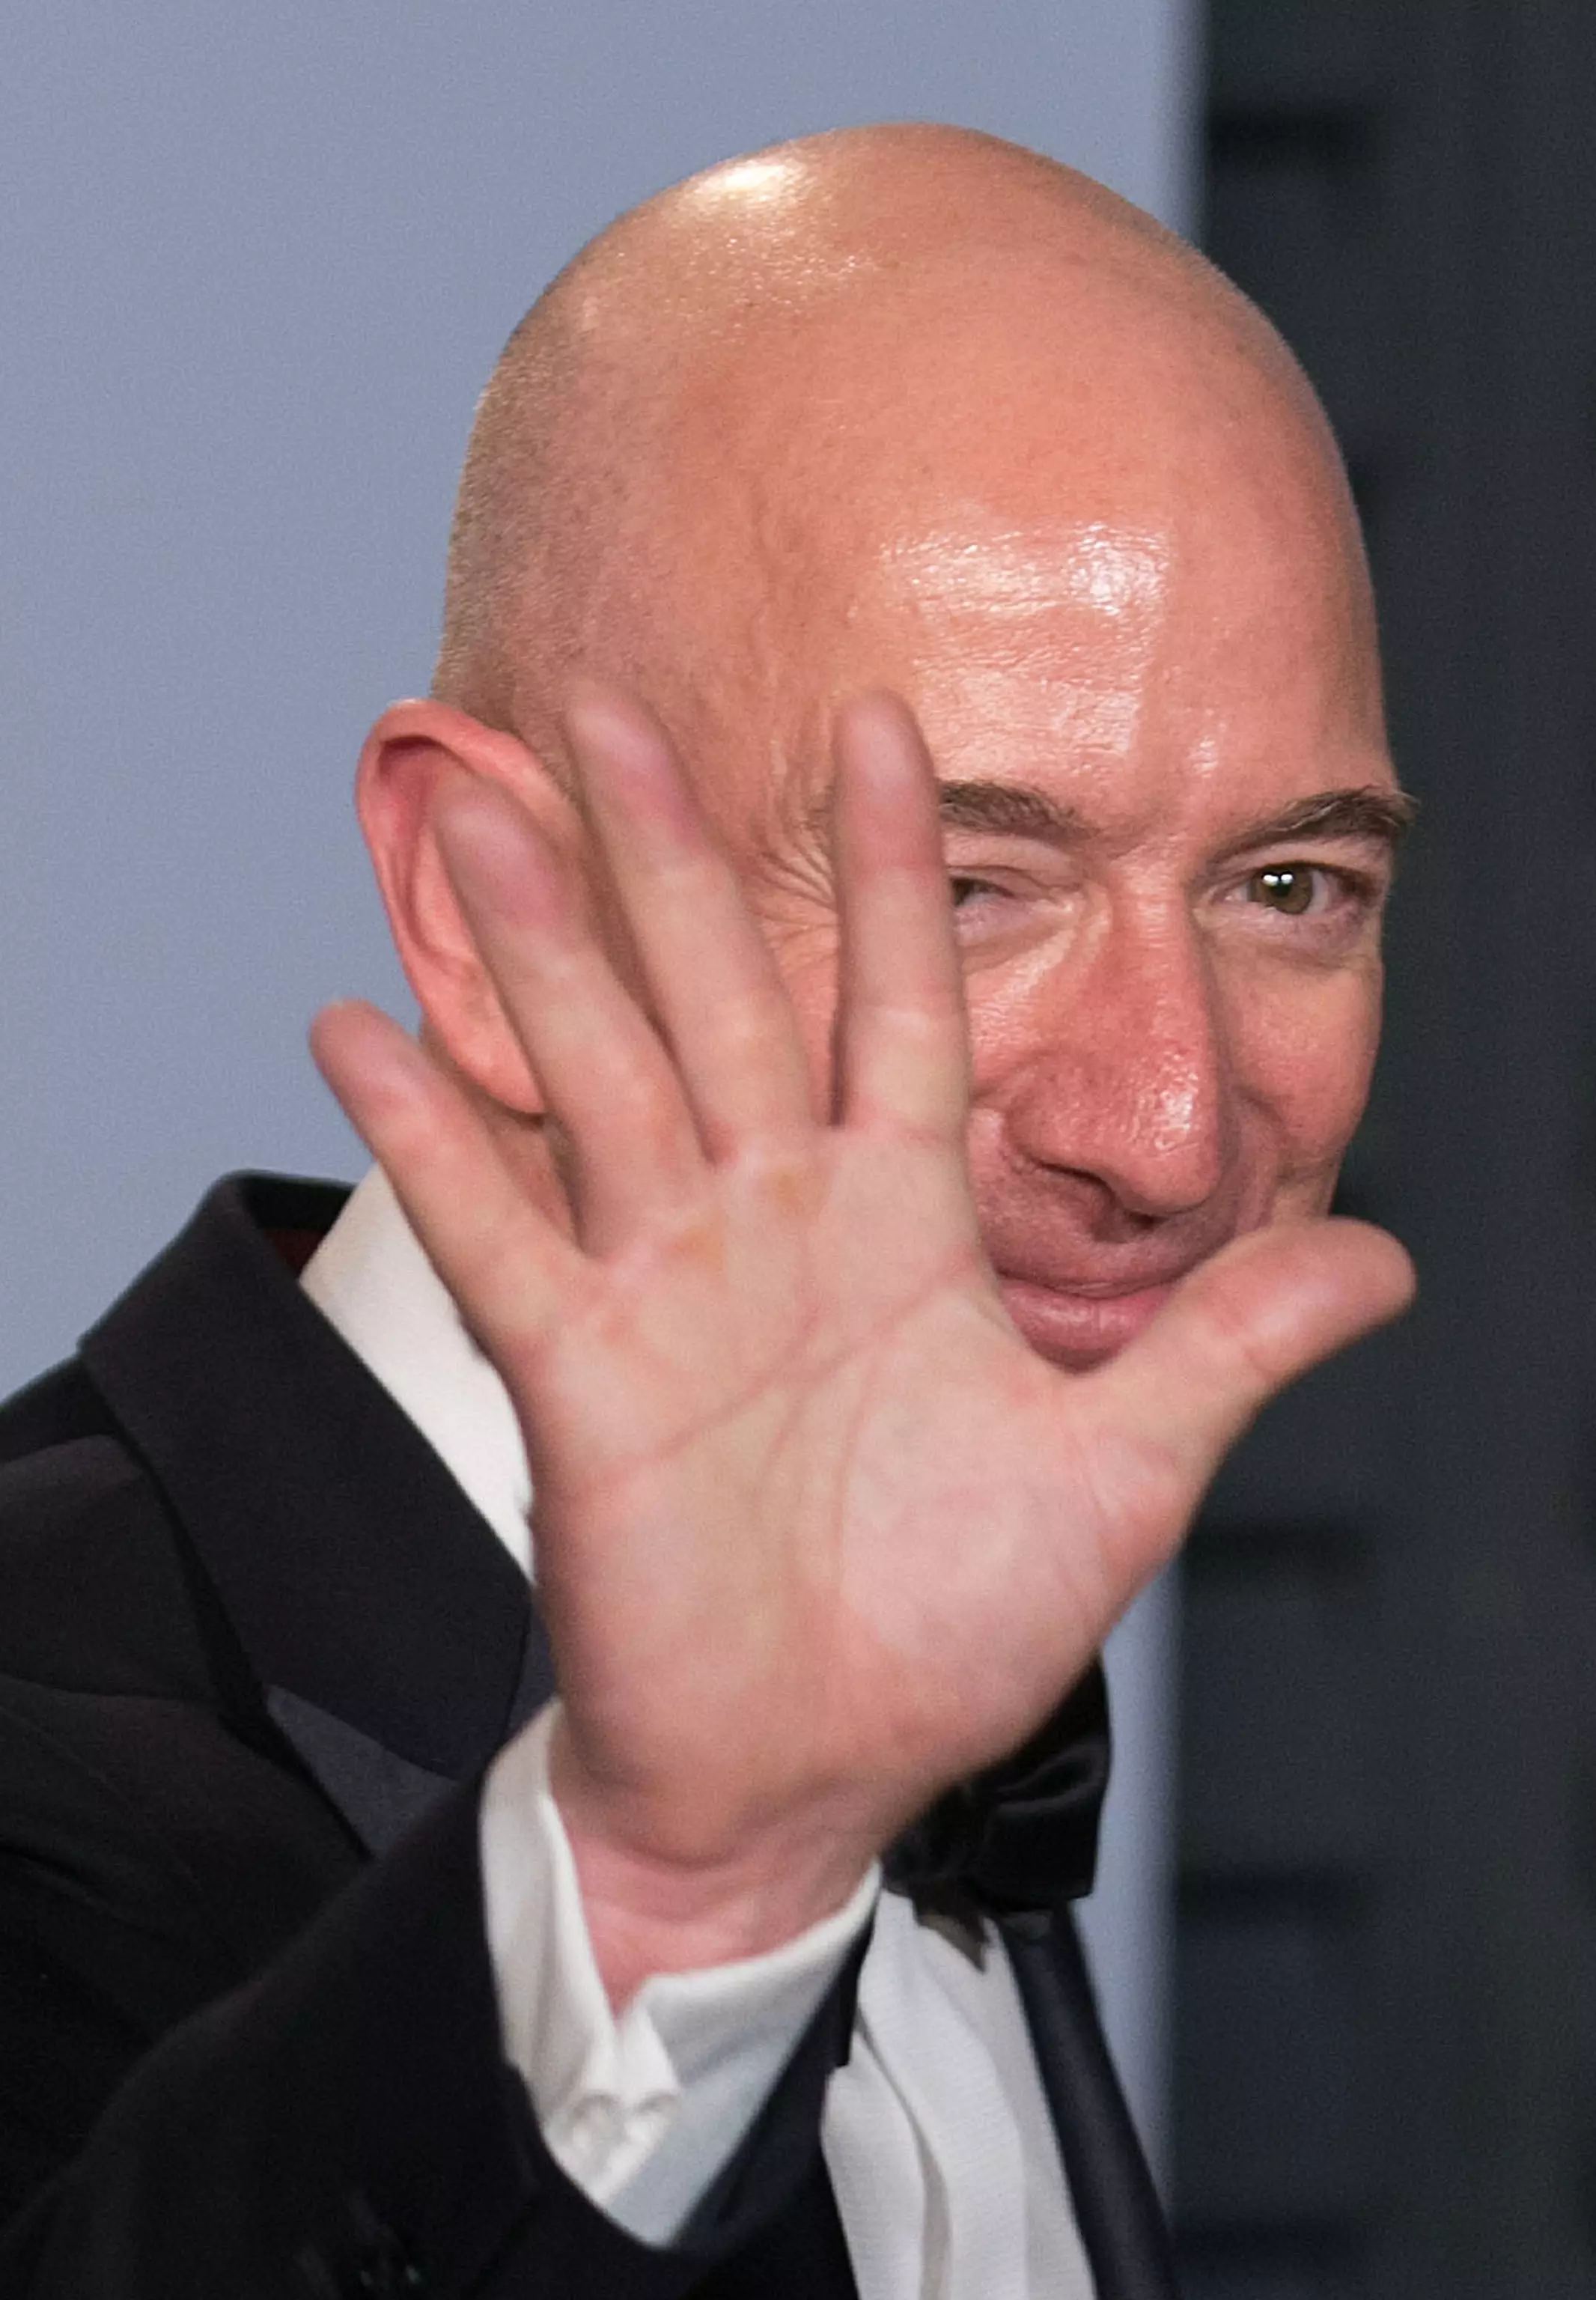 The billionaire announced this week that he was stepping down as Amazon CEO.